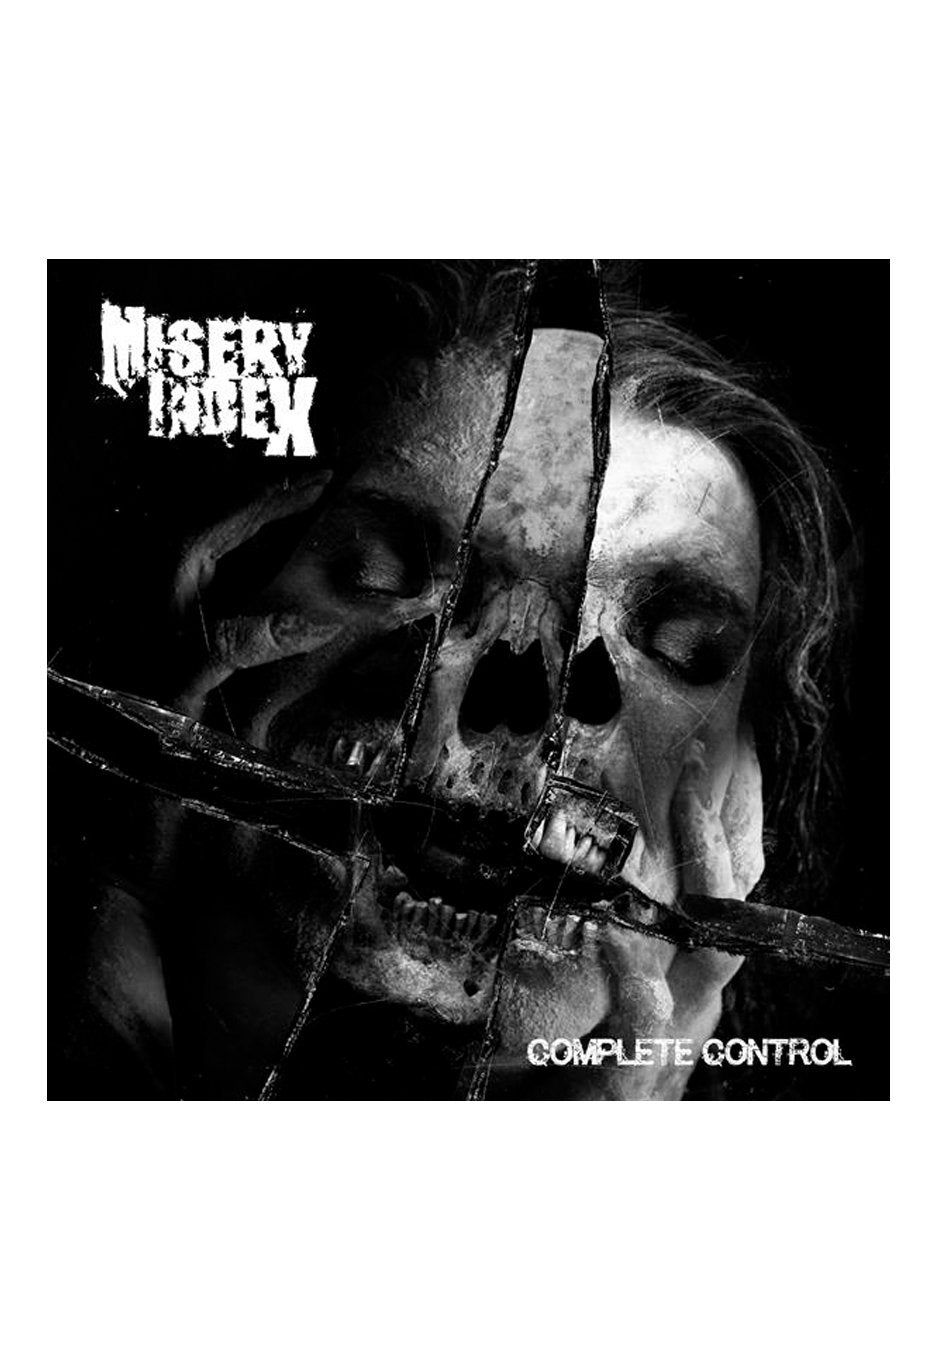 Misery Index - Complete Control - CD